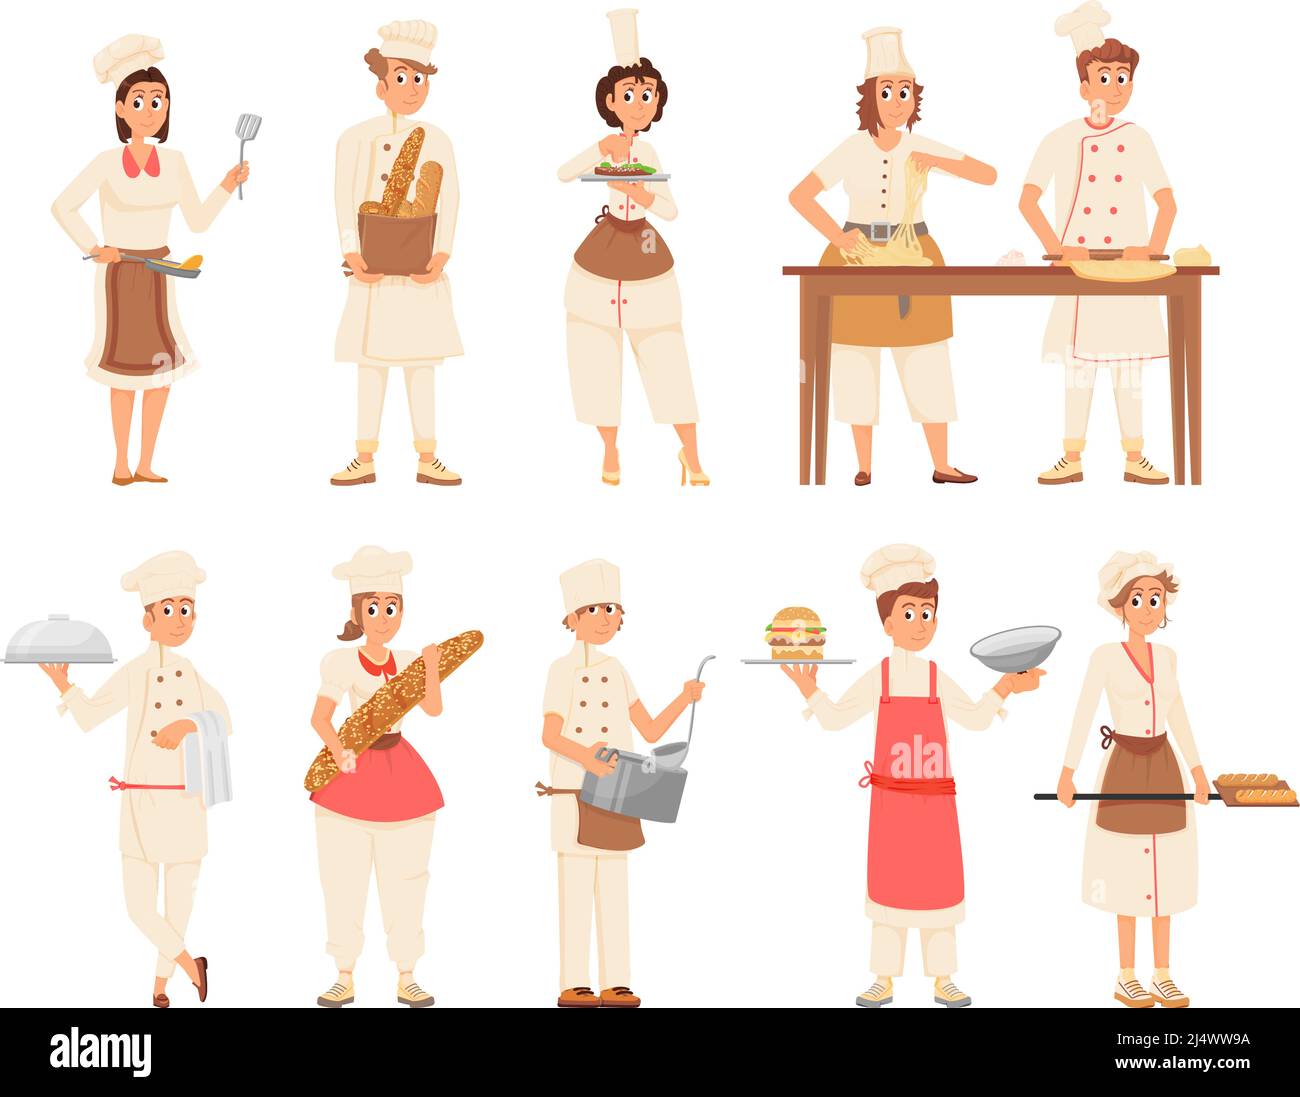 Restaurant team. Catering and waiters staff, isolated cafe workers. Cook in uniform, serving group. Cartoon people with food and fresh bread decent Stock Vector